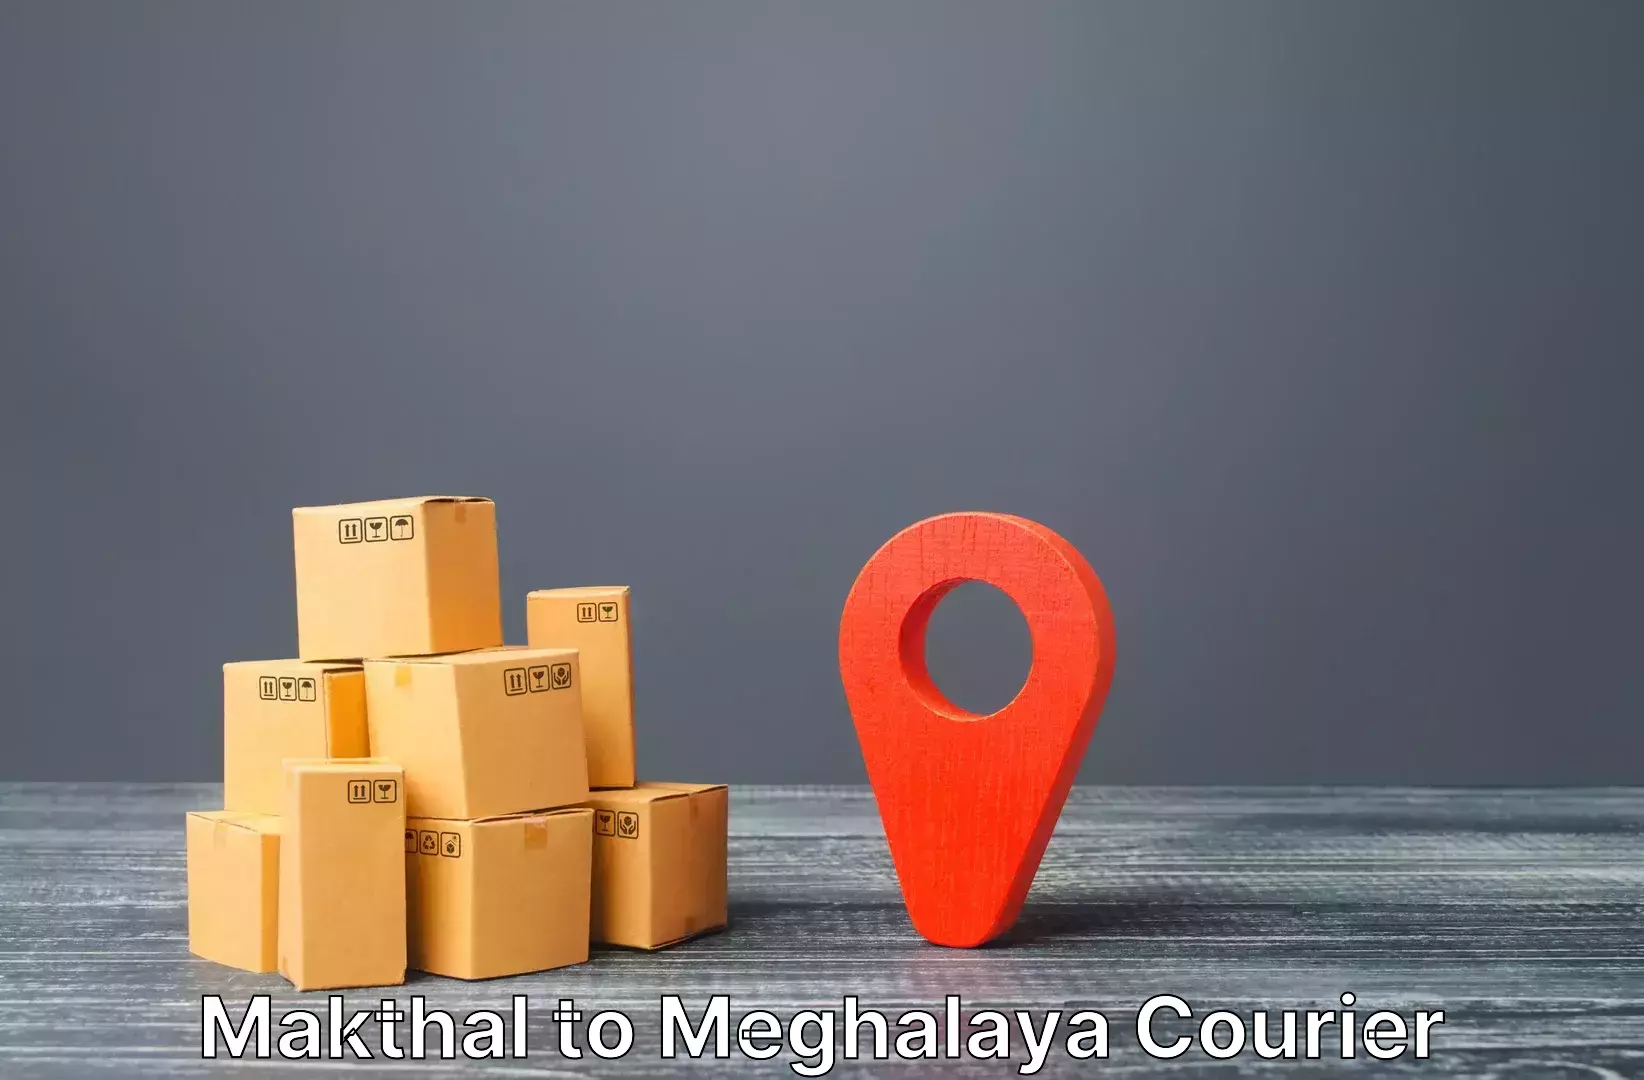 Luggage shipment specialists Makthal to Shillong